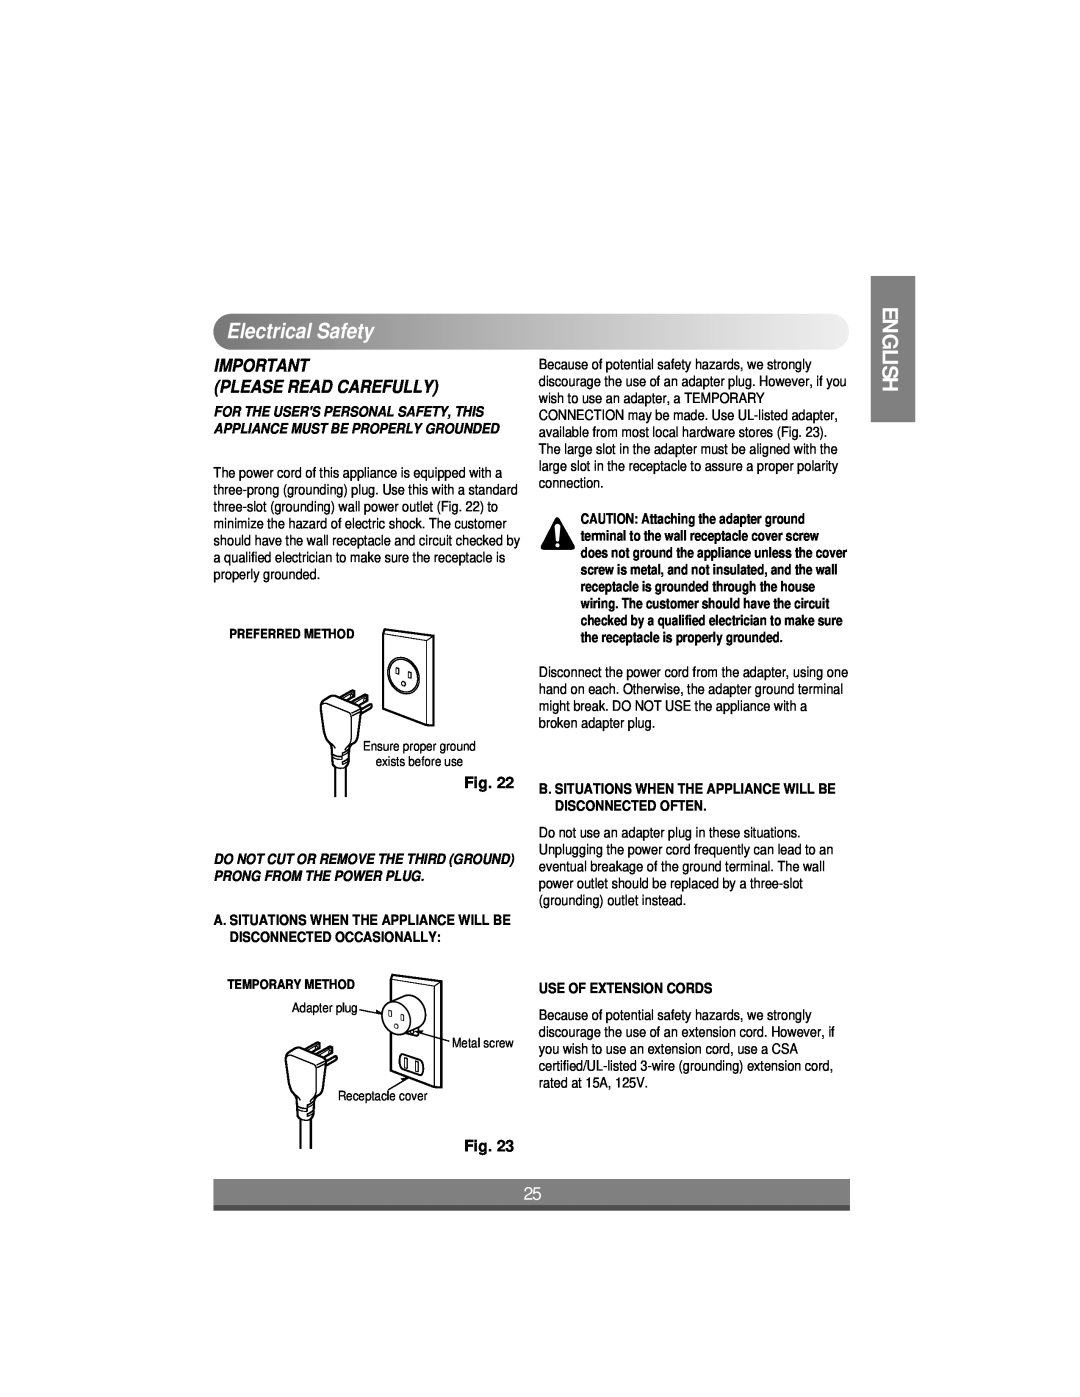 LG Electronics LW1004ER, LW1204ER, LW1404ER, LW1804ER ElectricalSafety, Please Read Carefully, Use Of Extension Cords 